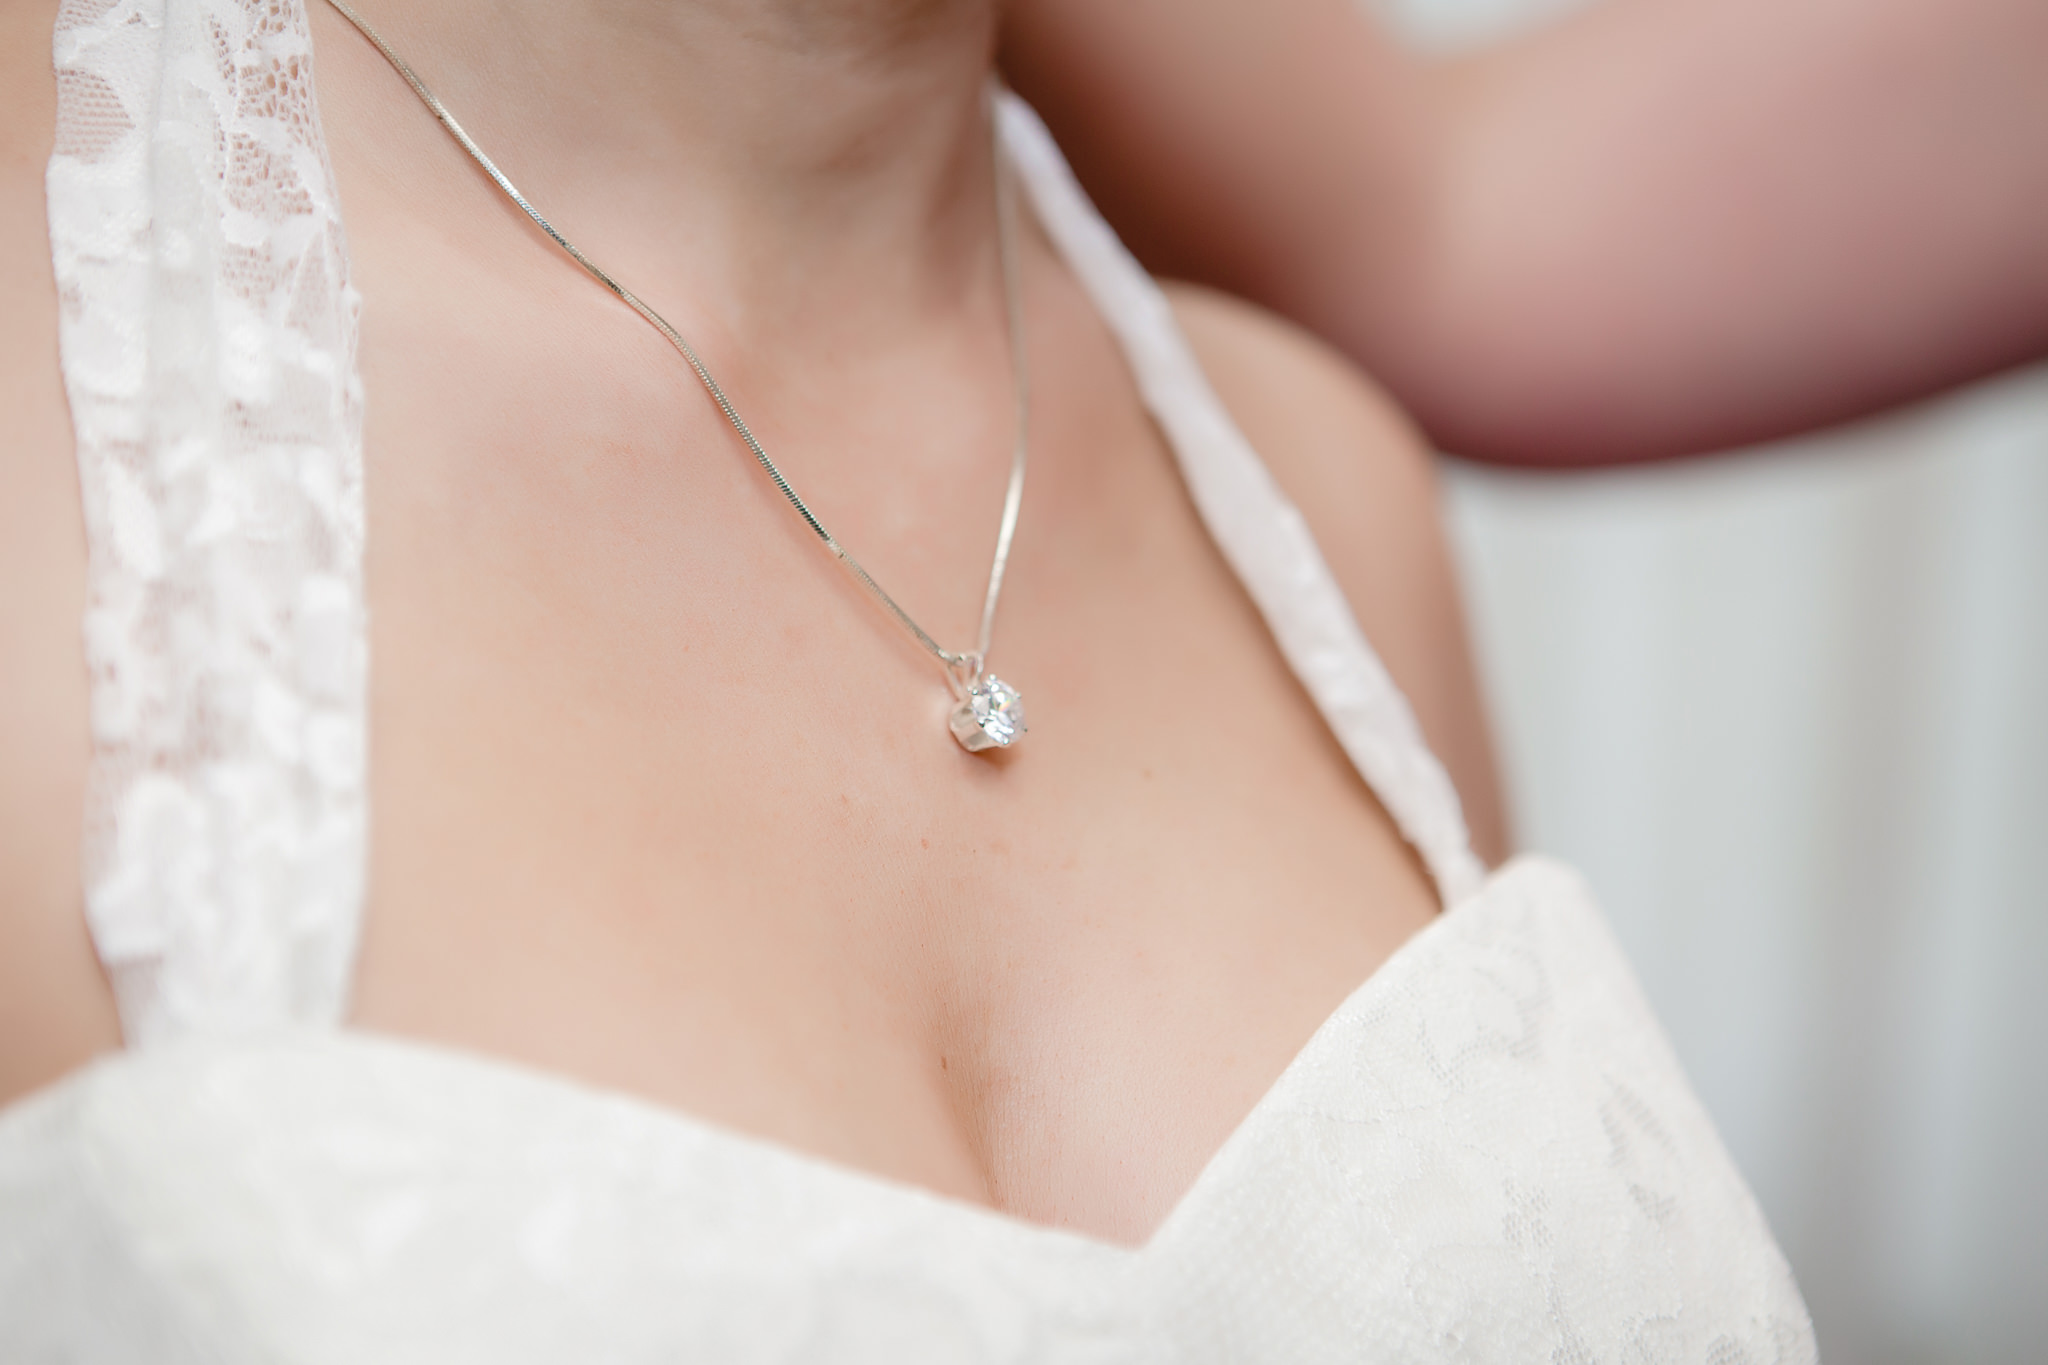 Diamond necklace on the bride before her wedding ceremony at St. Malachy Catholic Church